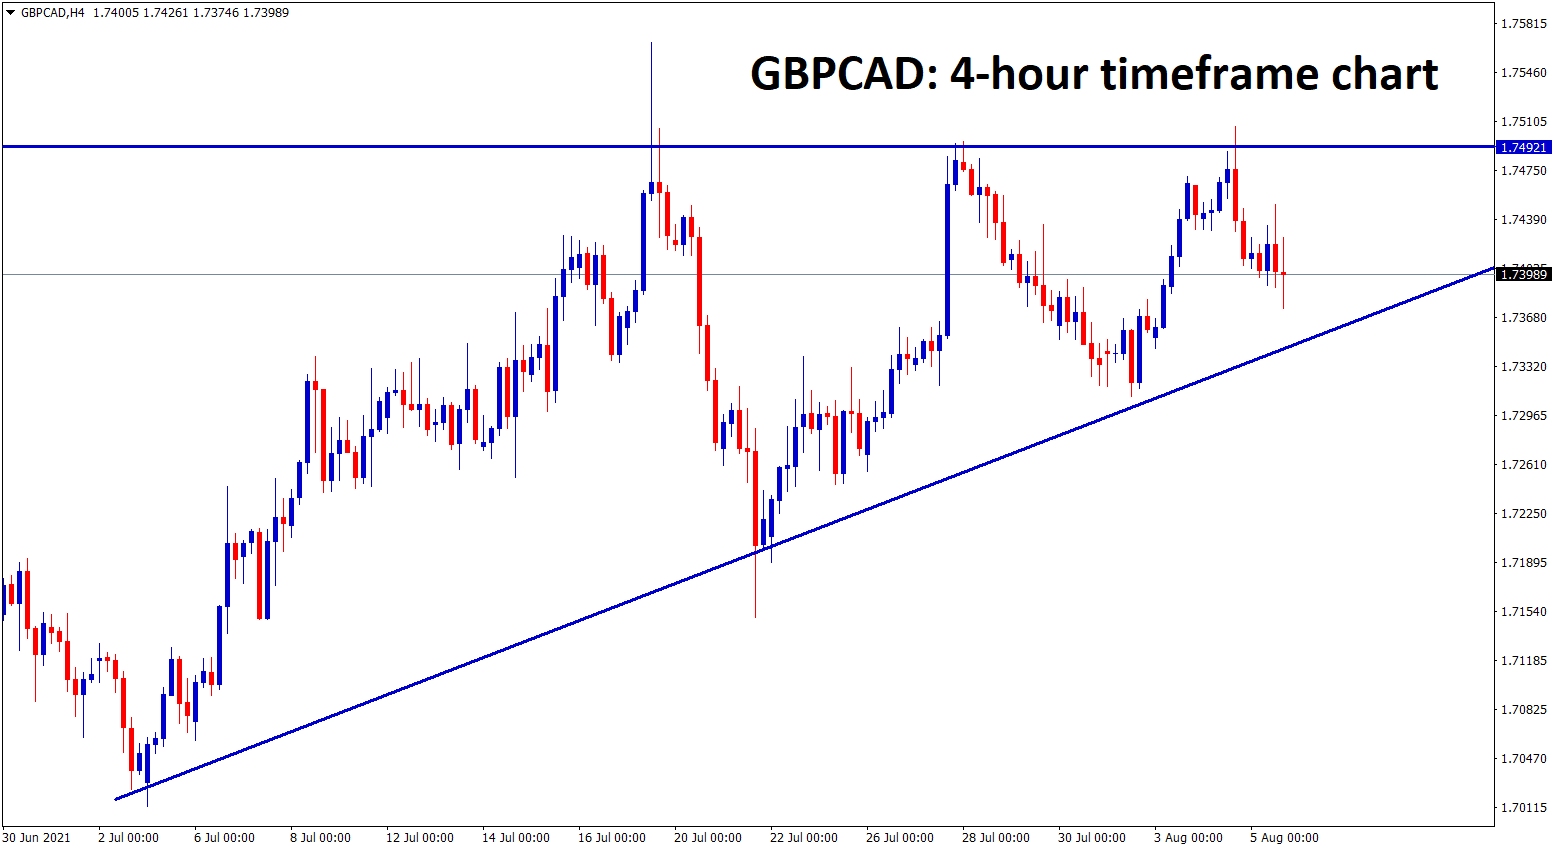 GBPCAD is moving in an Ascending Triangle Pattern wait for the breakout from this pattern